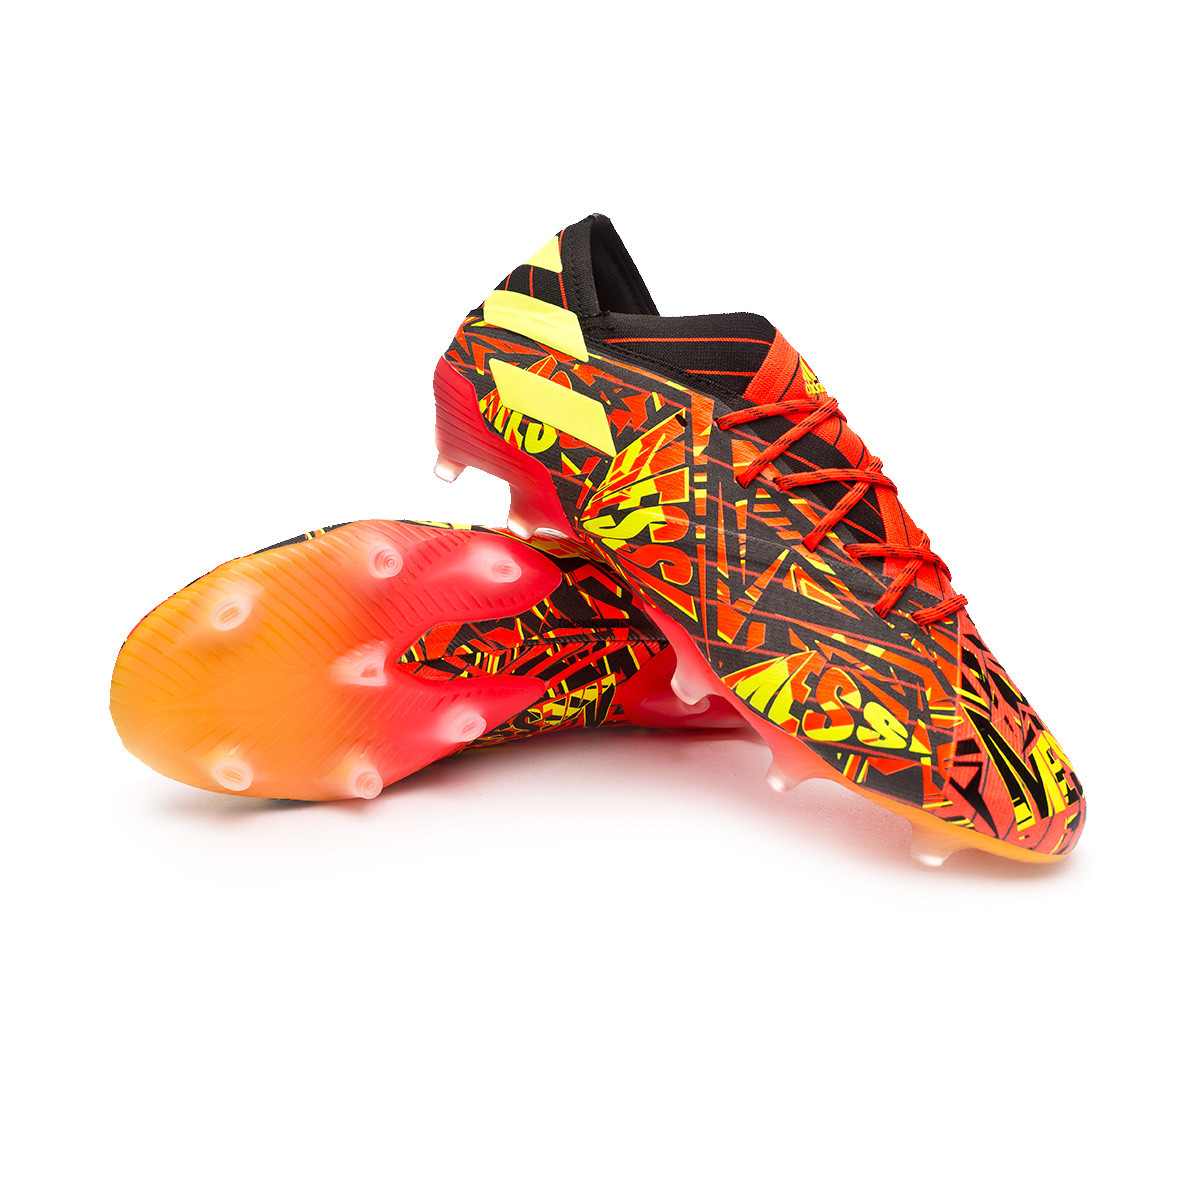 messi football boots